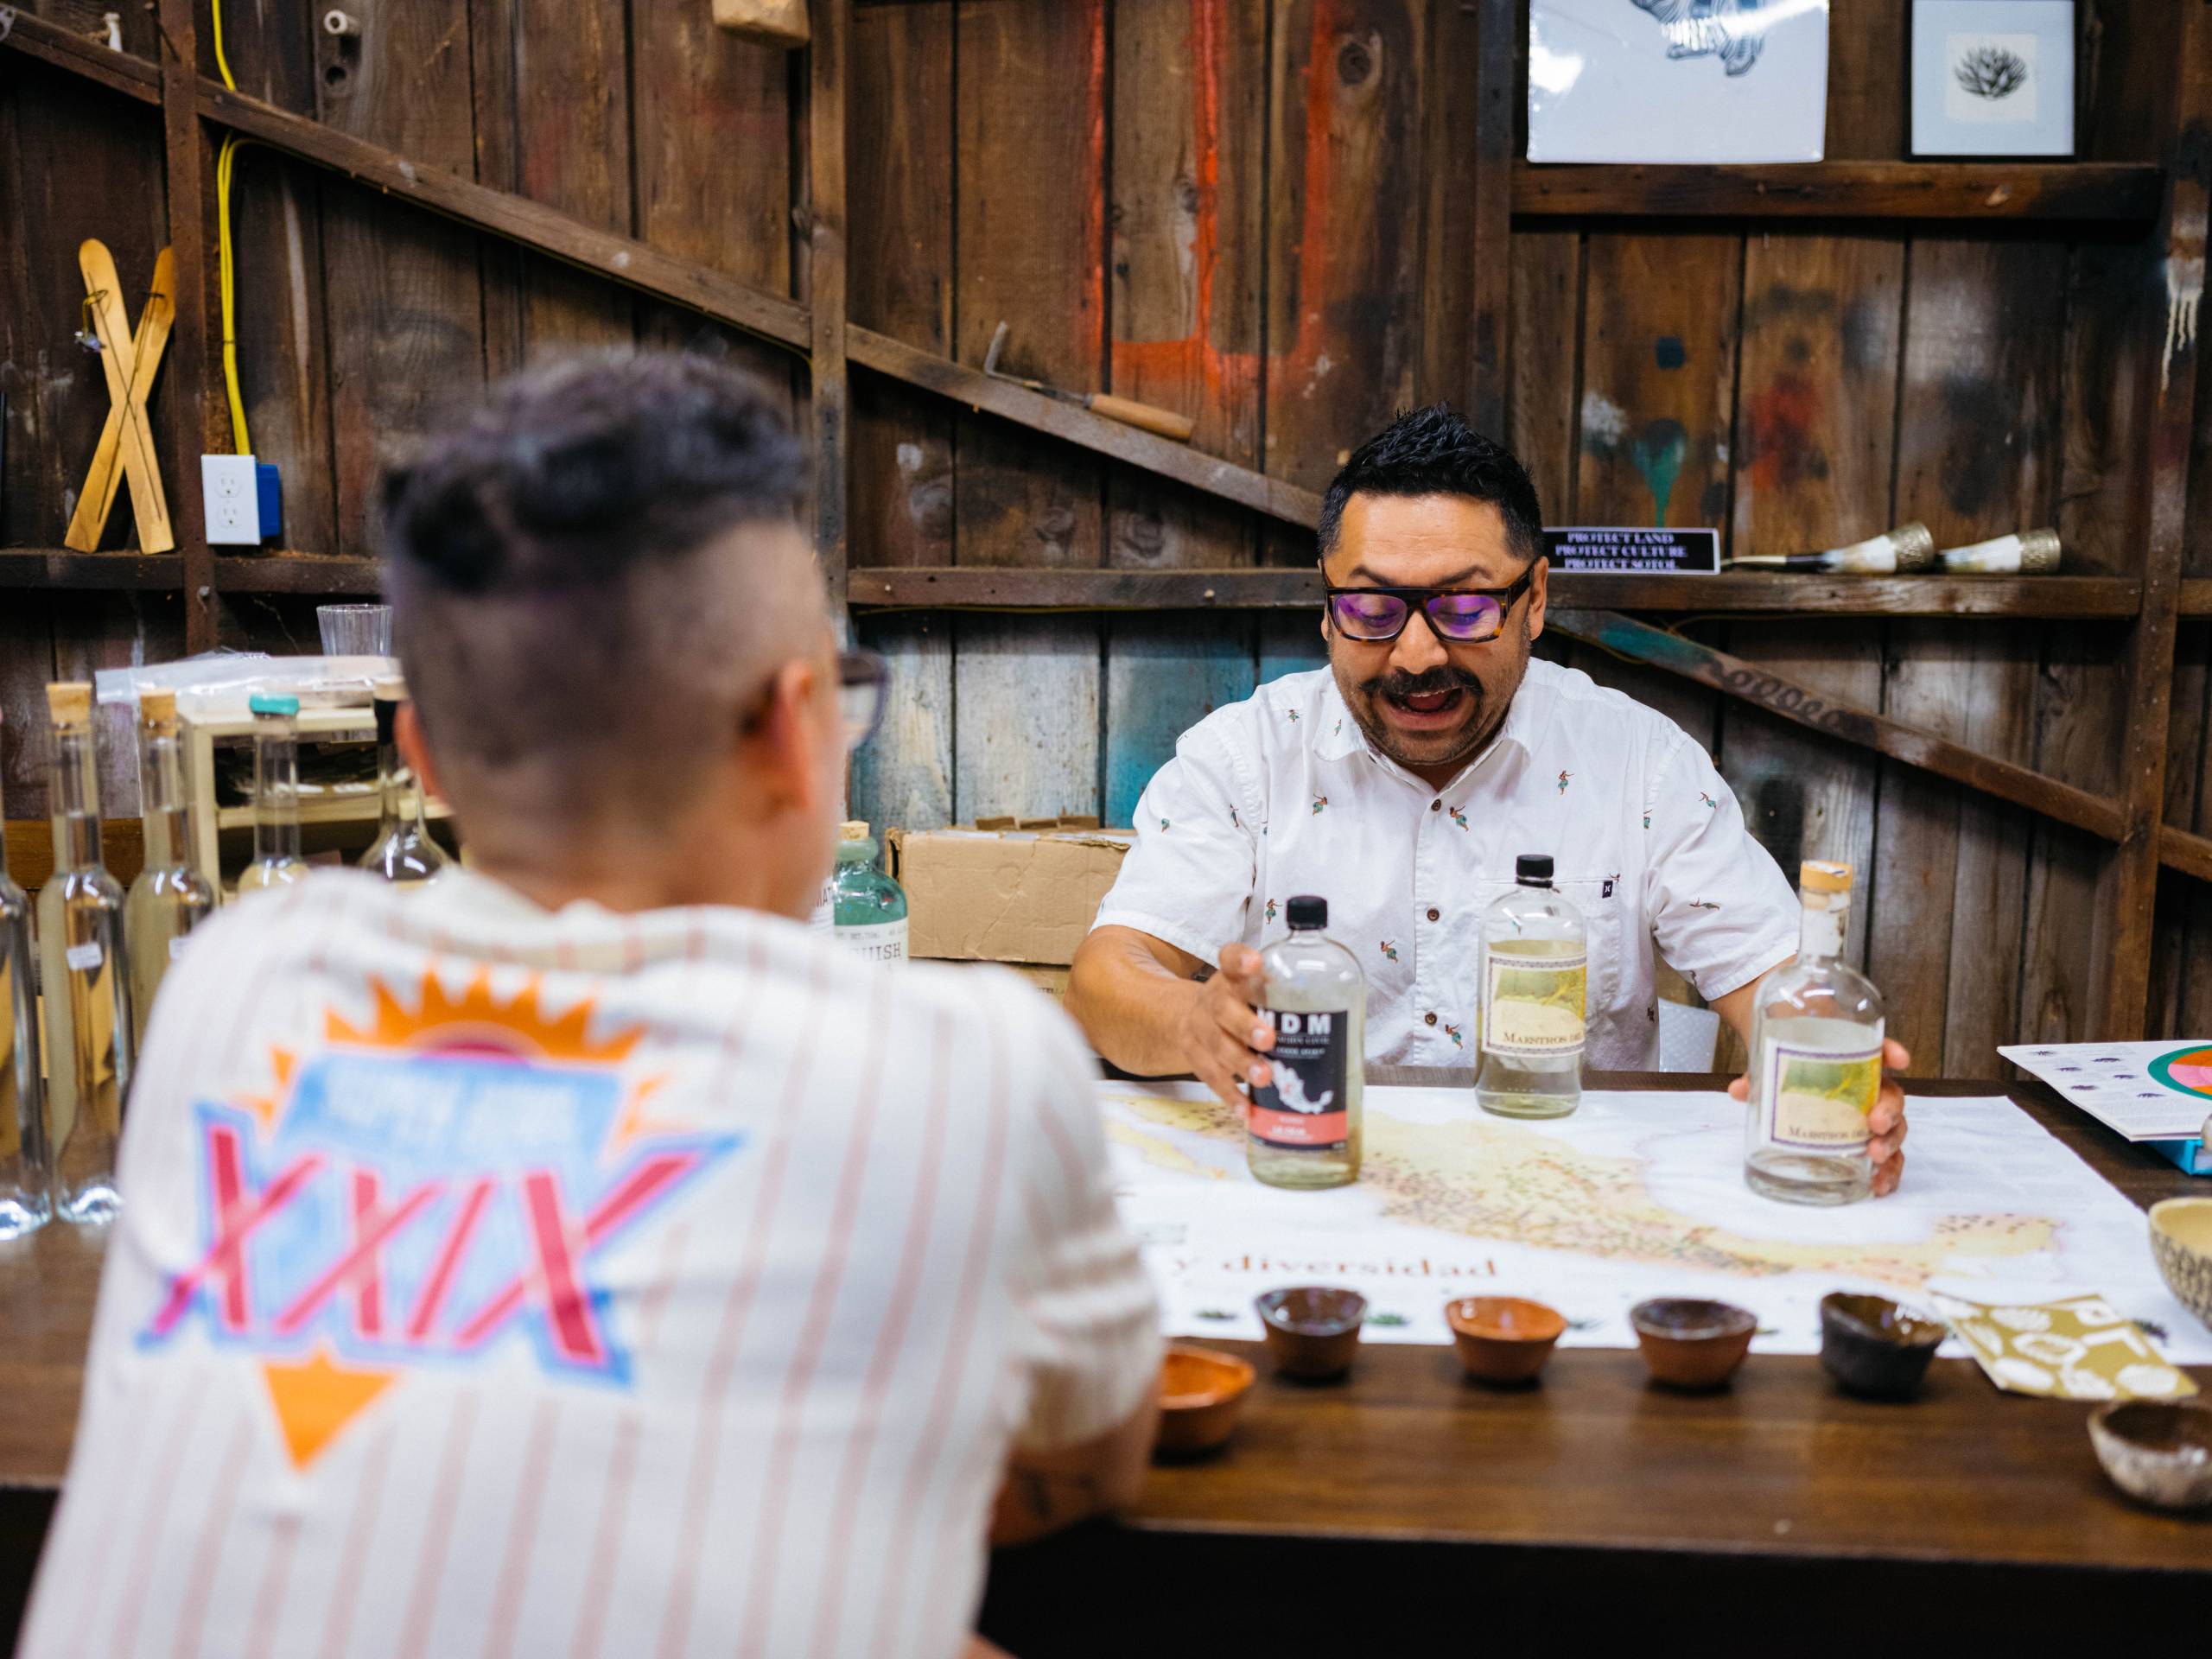 a mezcal expert explains his favorite mezcal options to a journalist sitting at the same table